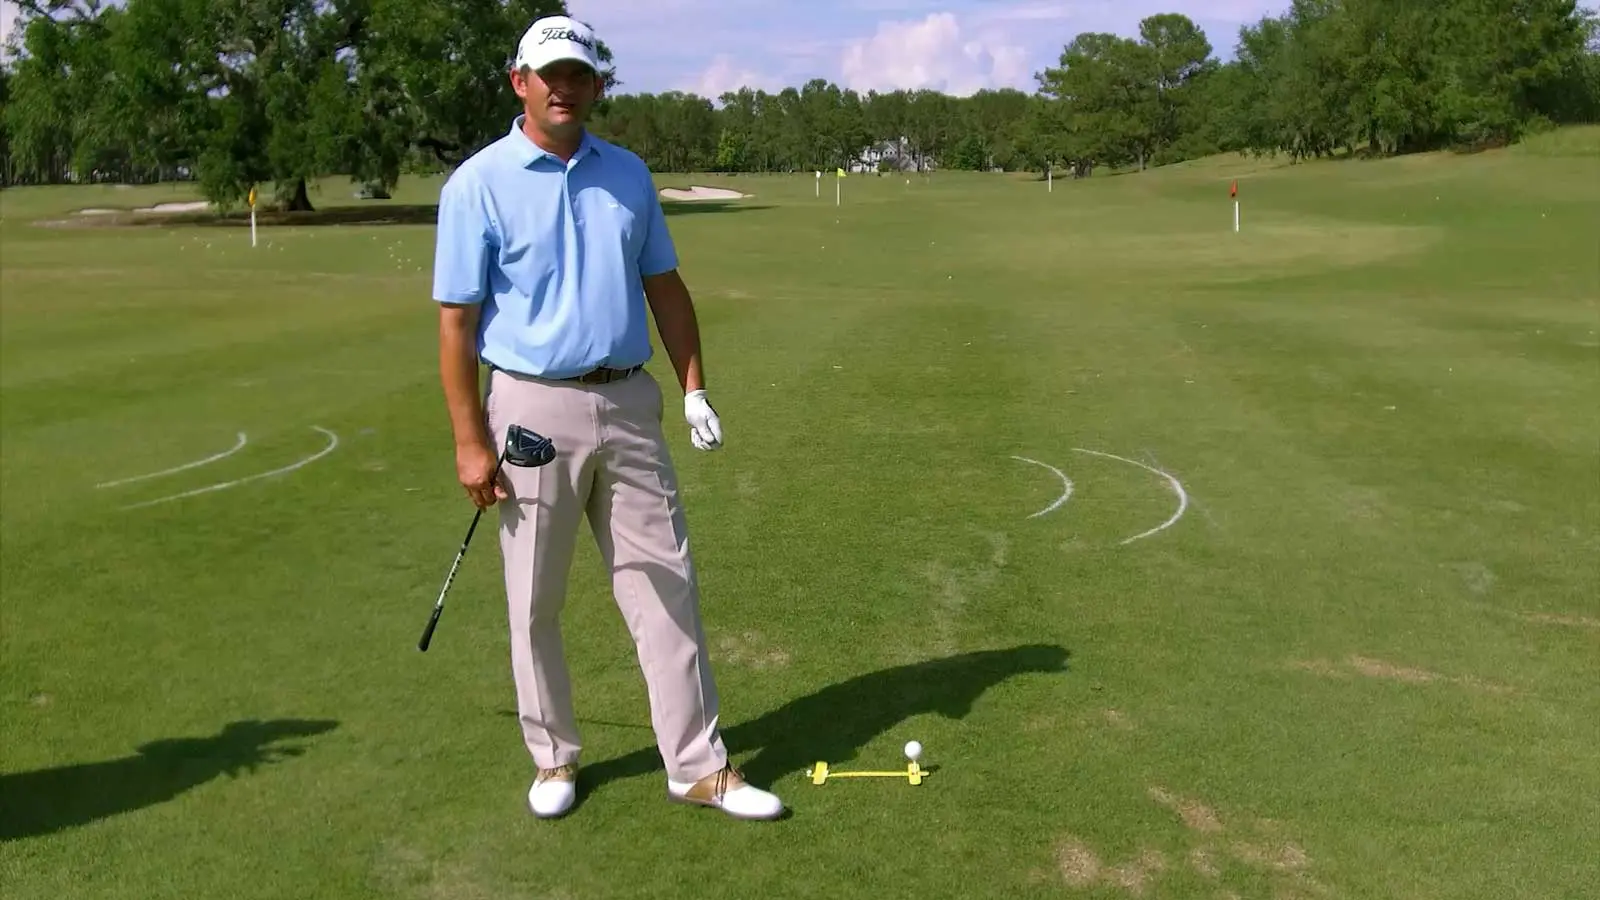 Video Tip – Ball Position and Attack Angle